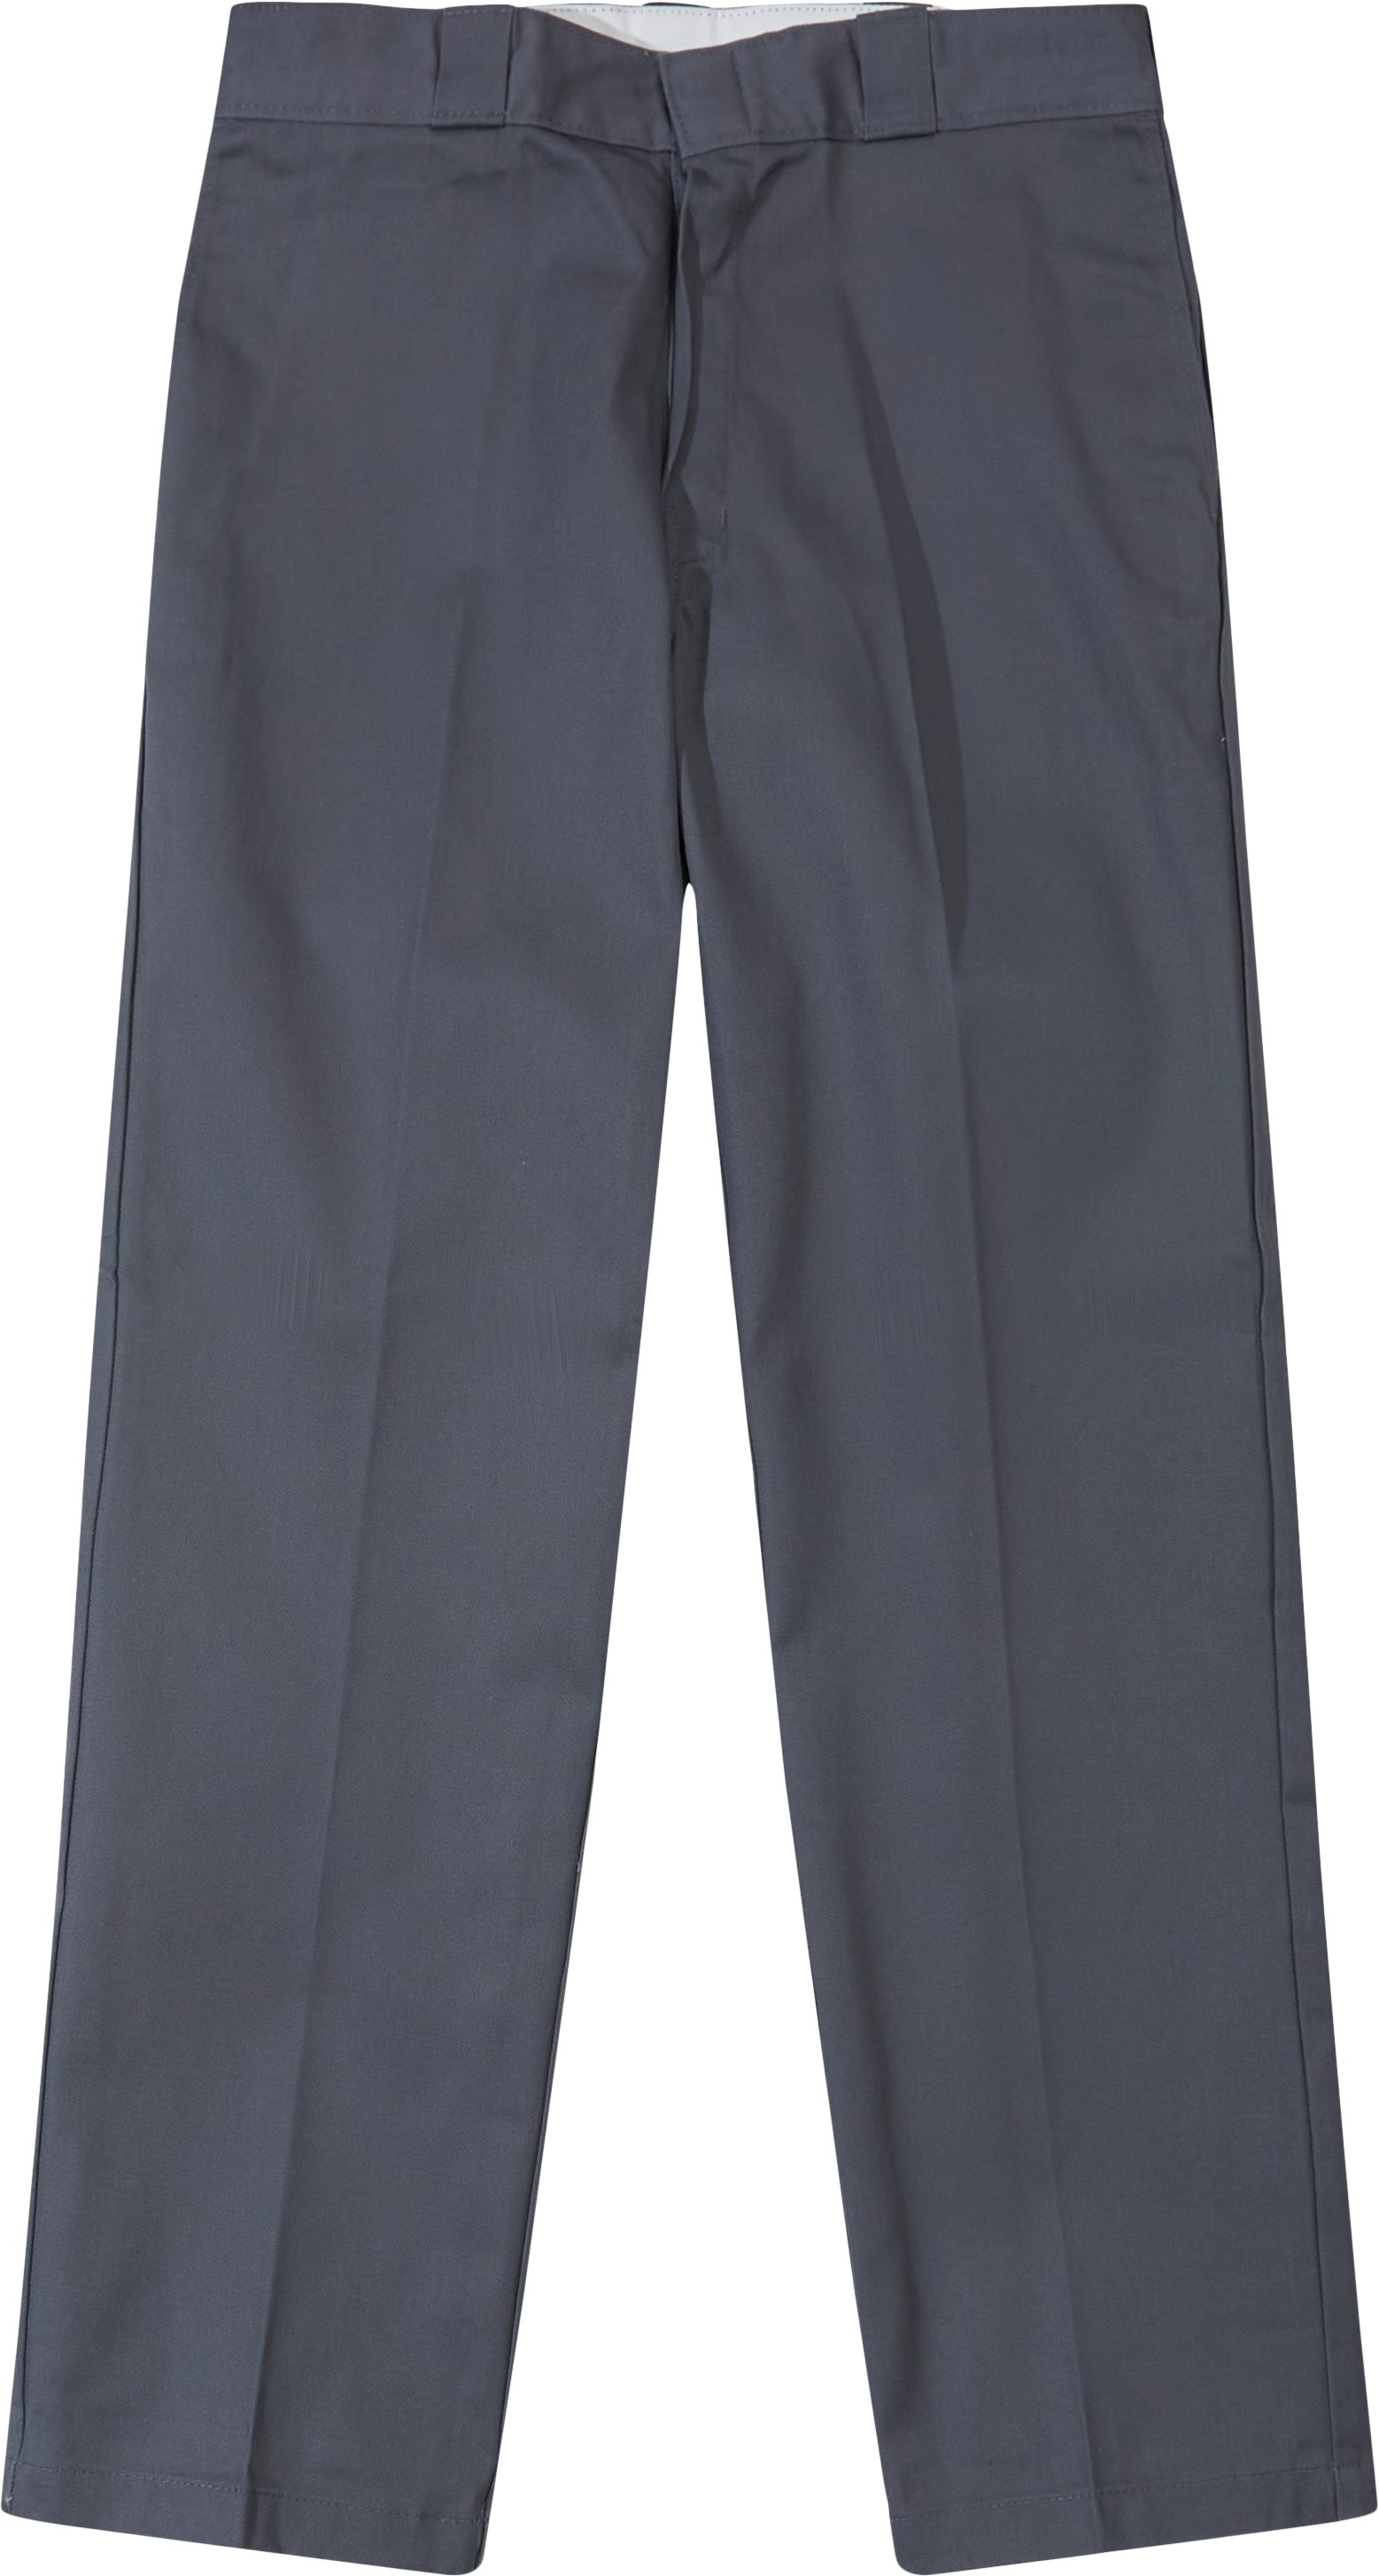 874 Work Pant - Trousers - Relaxed fit - Grey